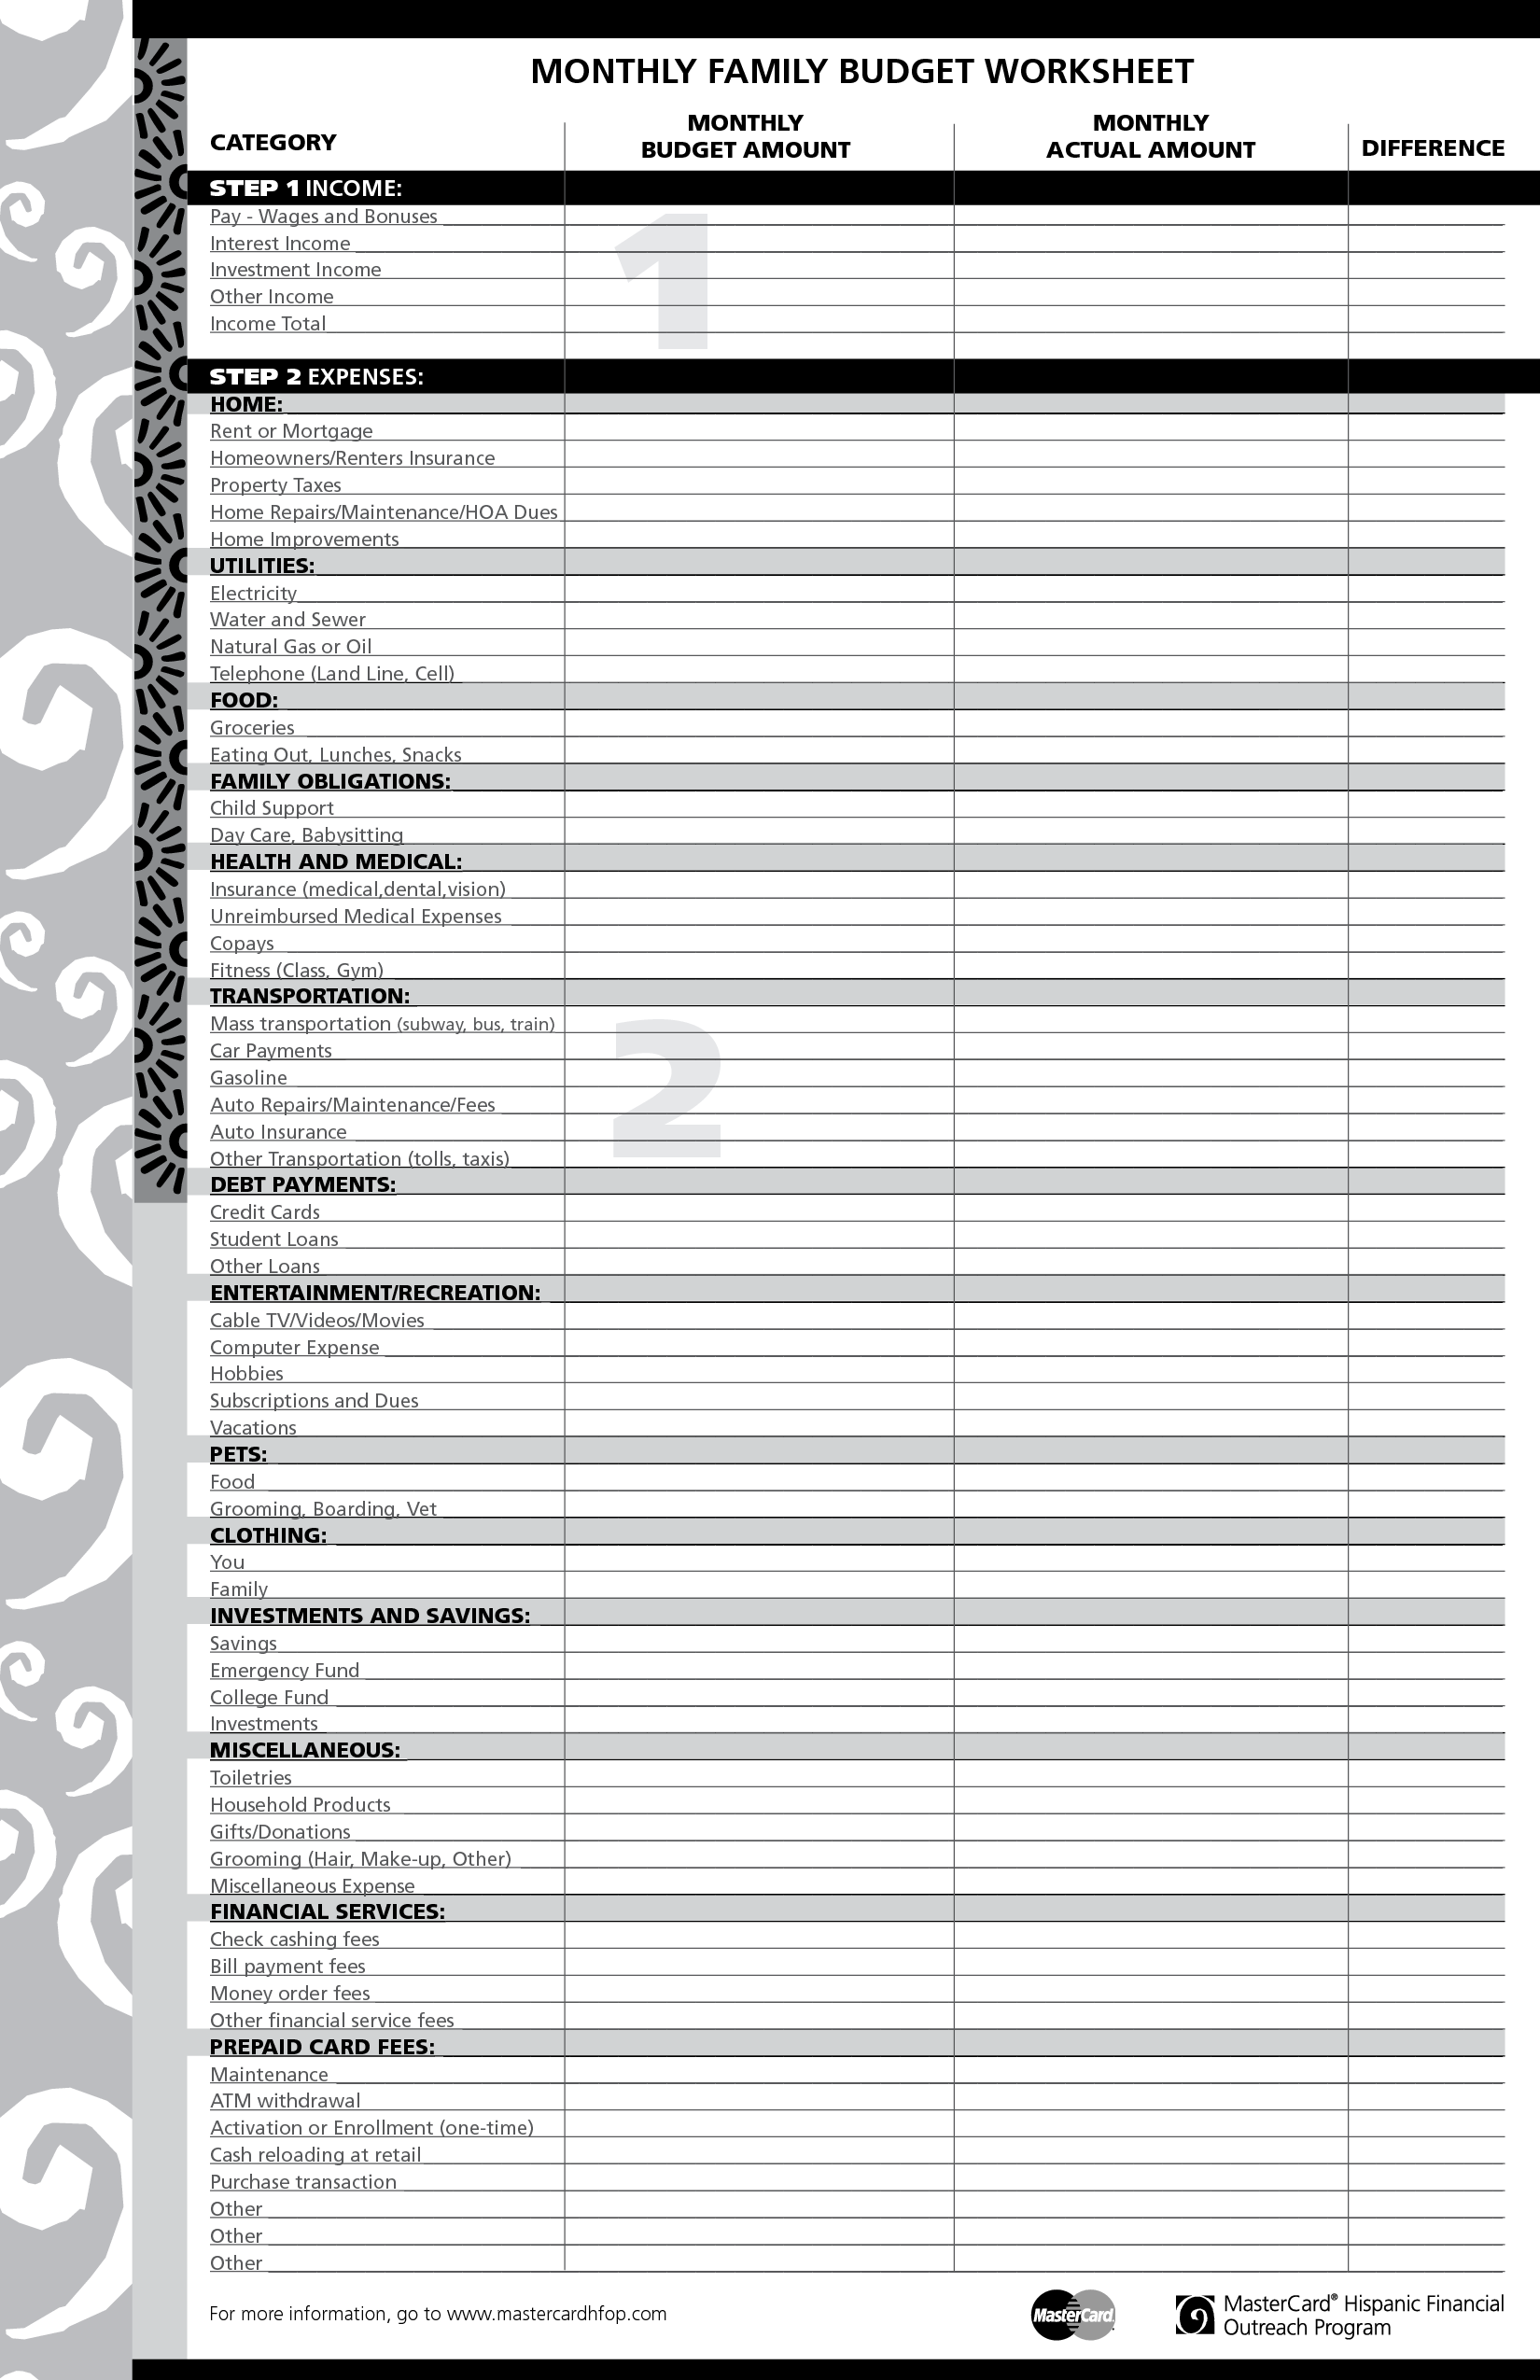 16 Best Images of Budget Worksheet Monthly Bill - Blank Monthly Budget